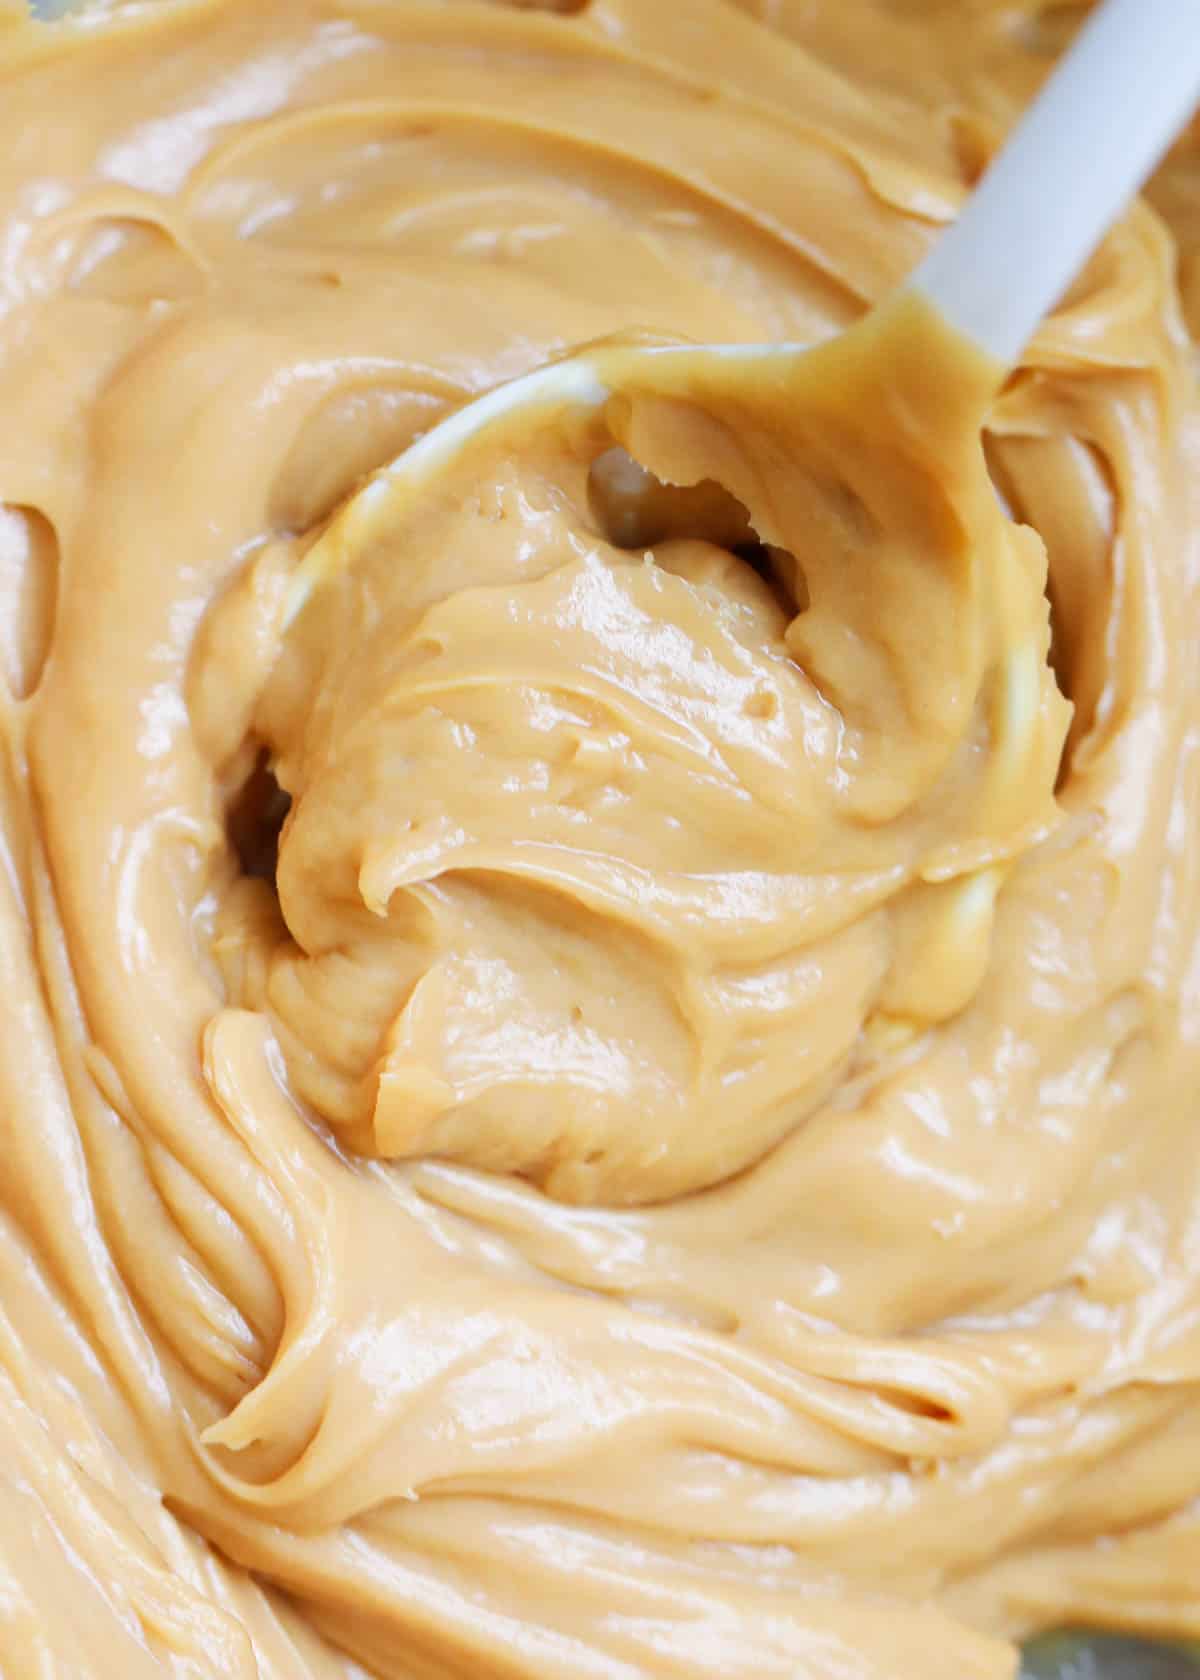 Caramel cream cheese frosting with a white spatula.